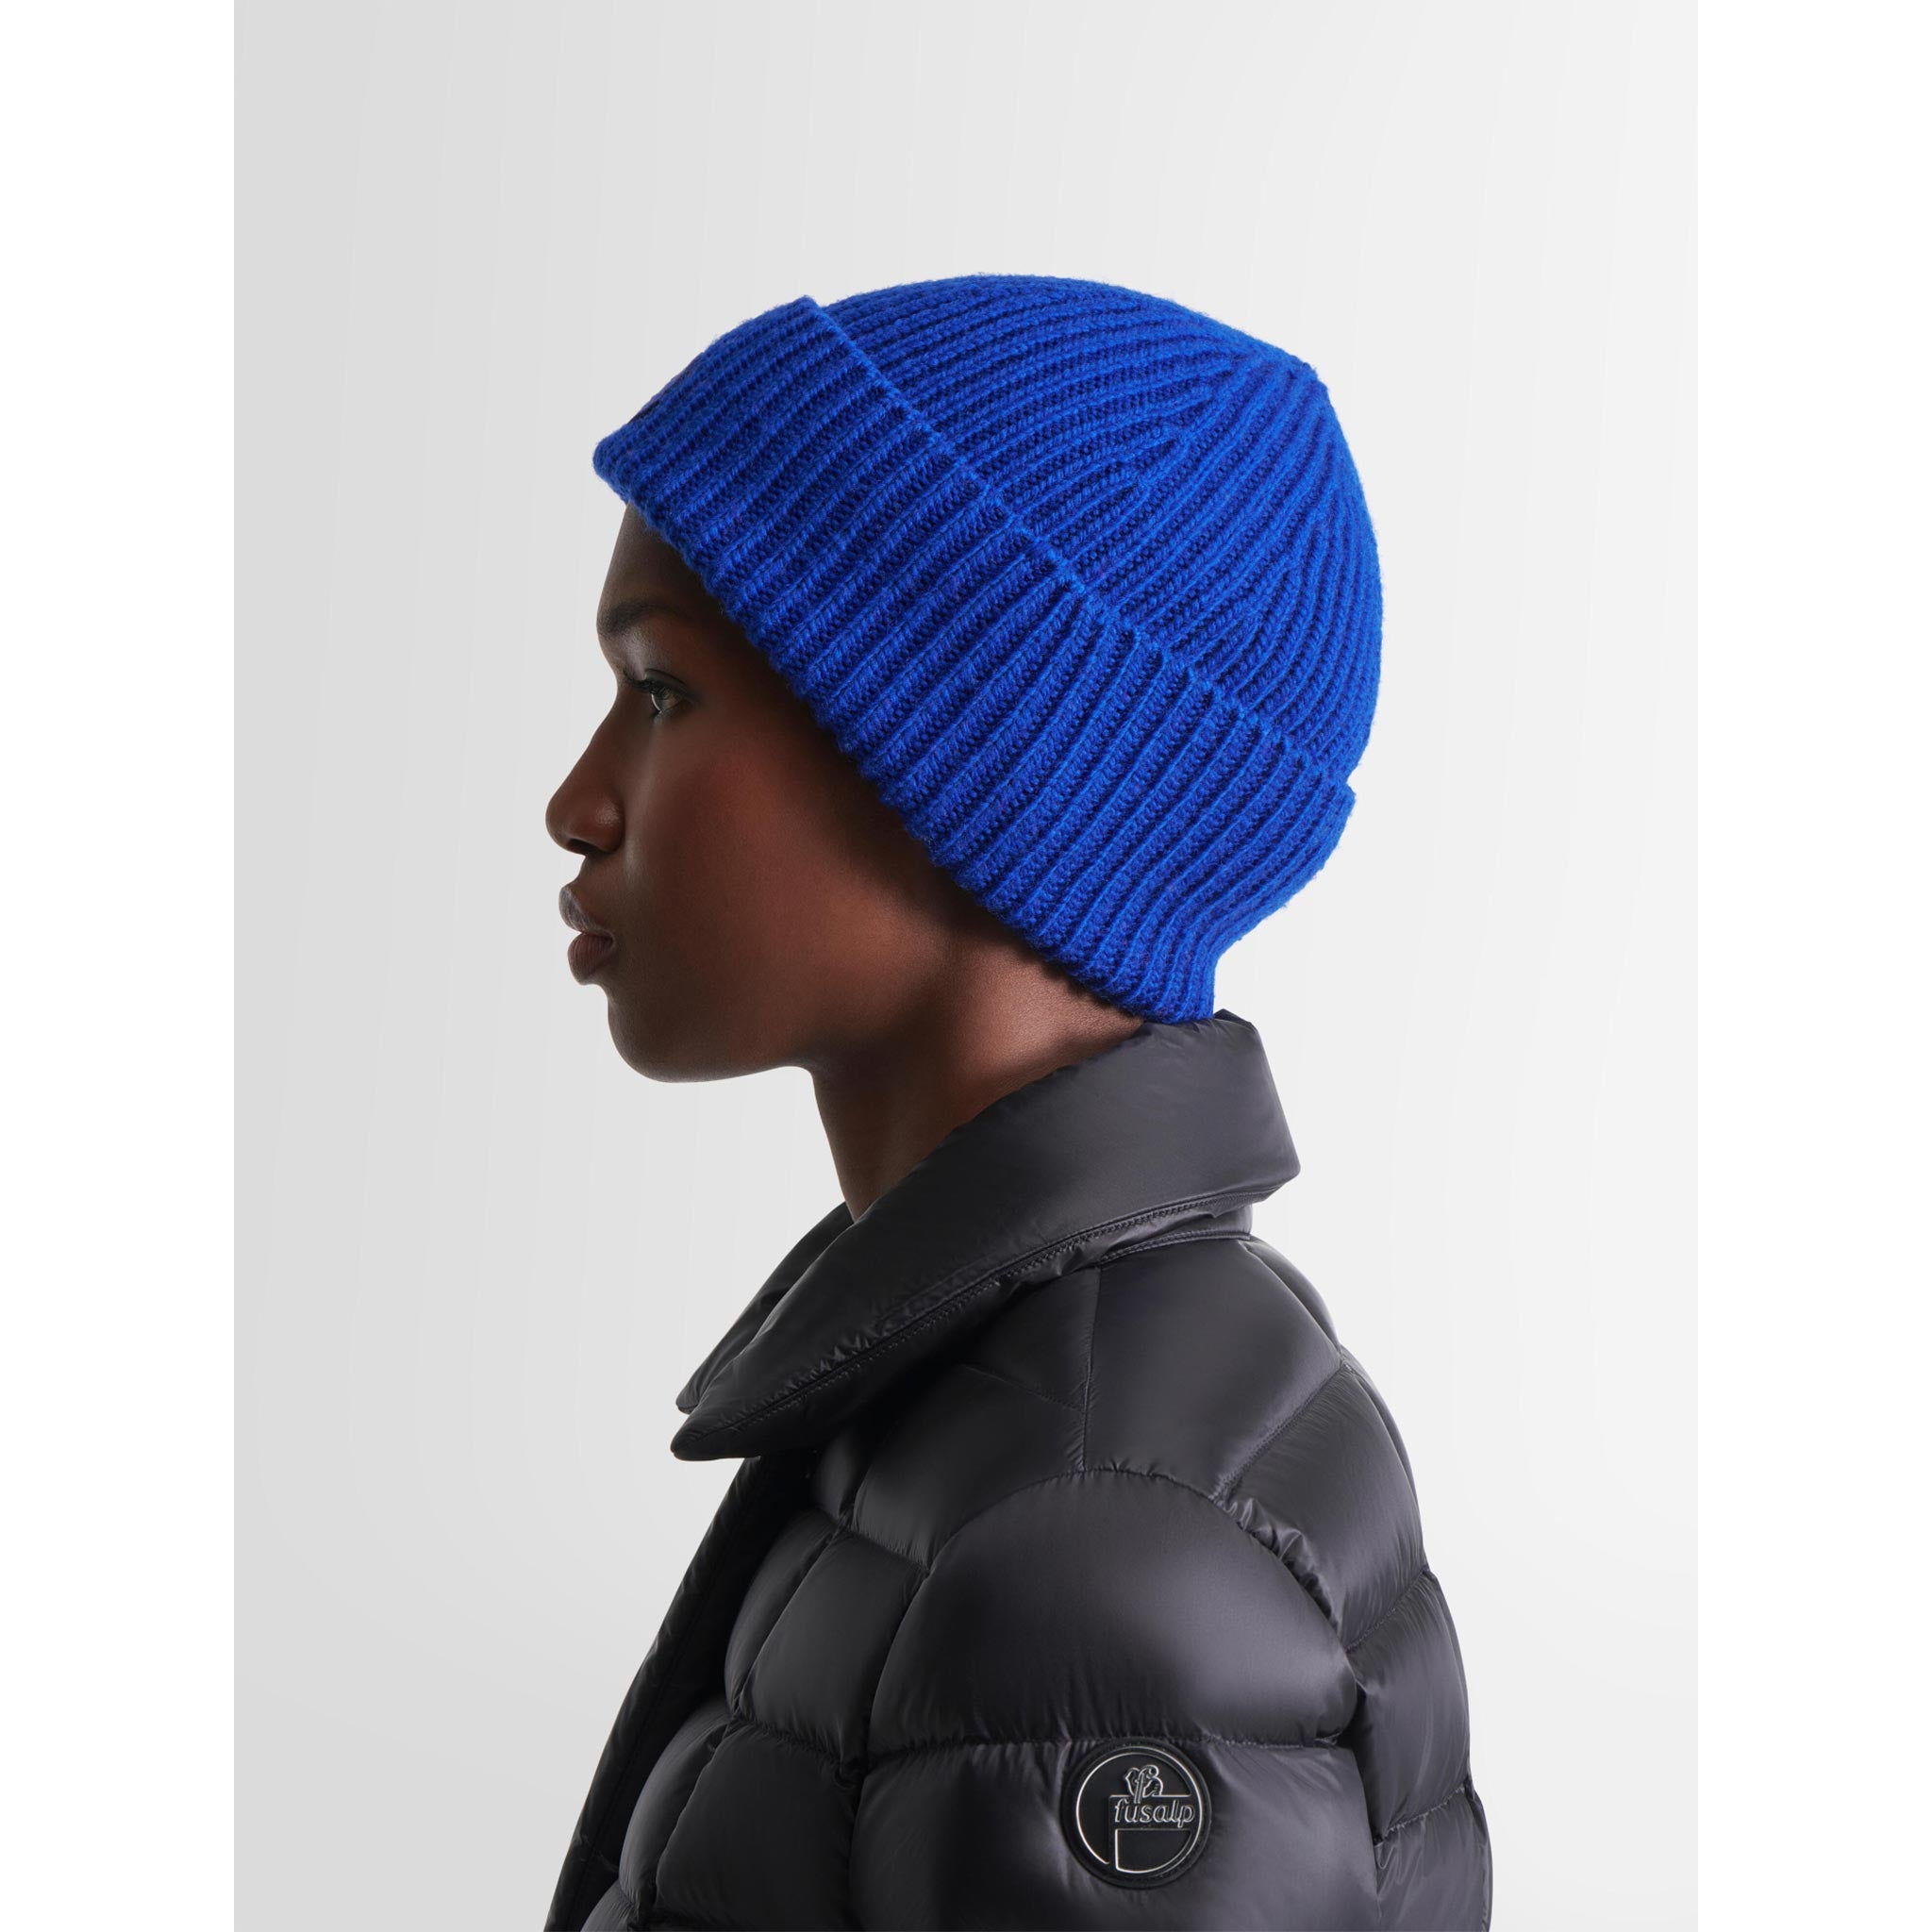 Knit Beanie in Royal